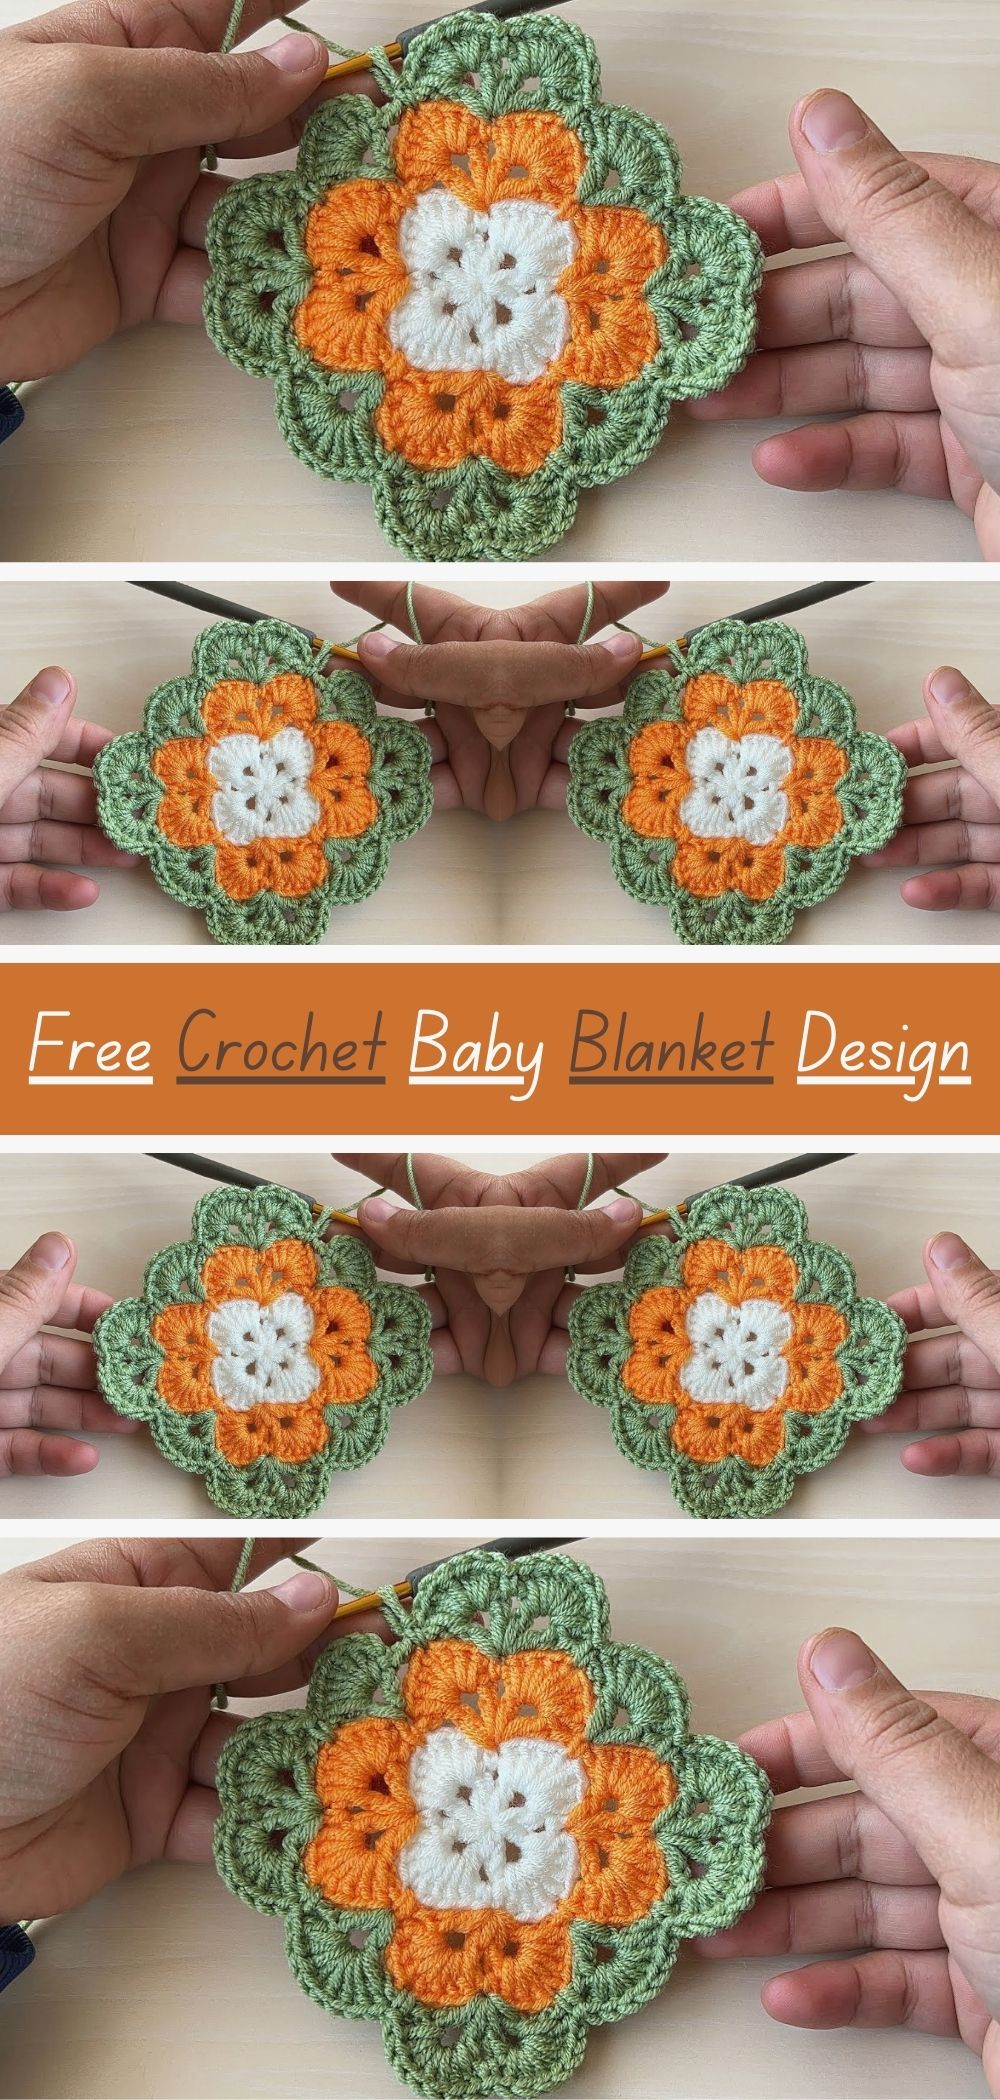 Free Crochet Baby Blanket Design - Create a beautiful and cozy baby blanket with this free crochet pattern